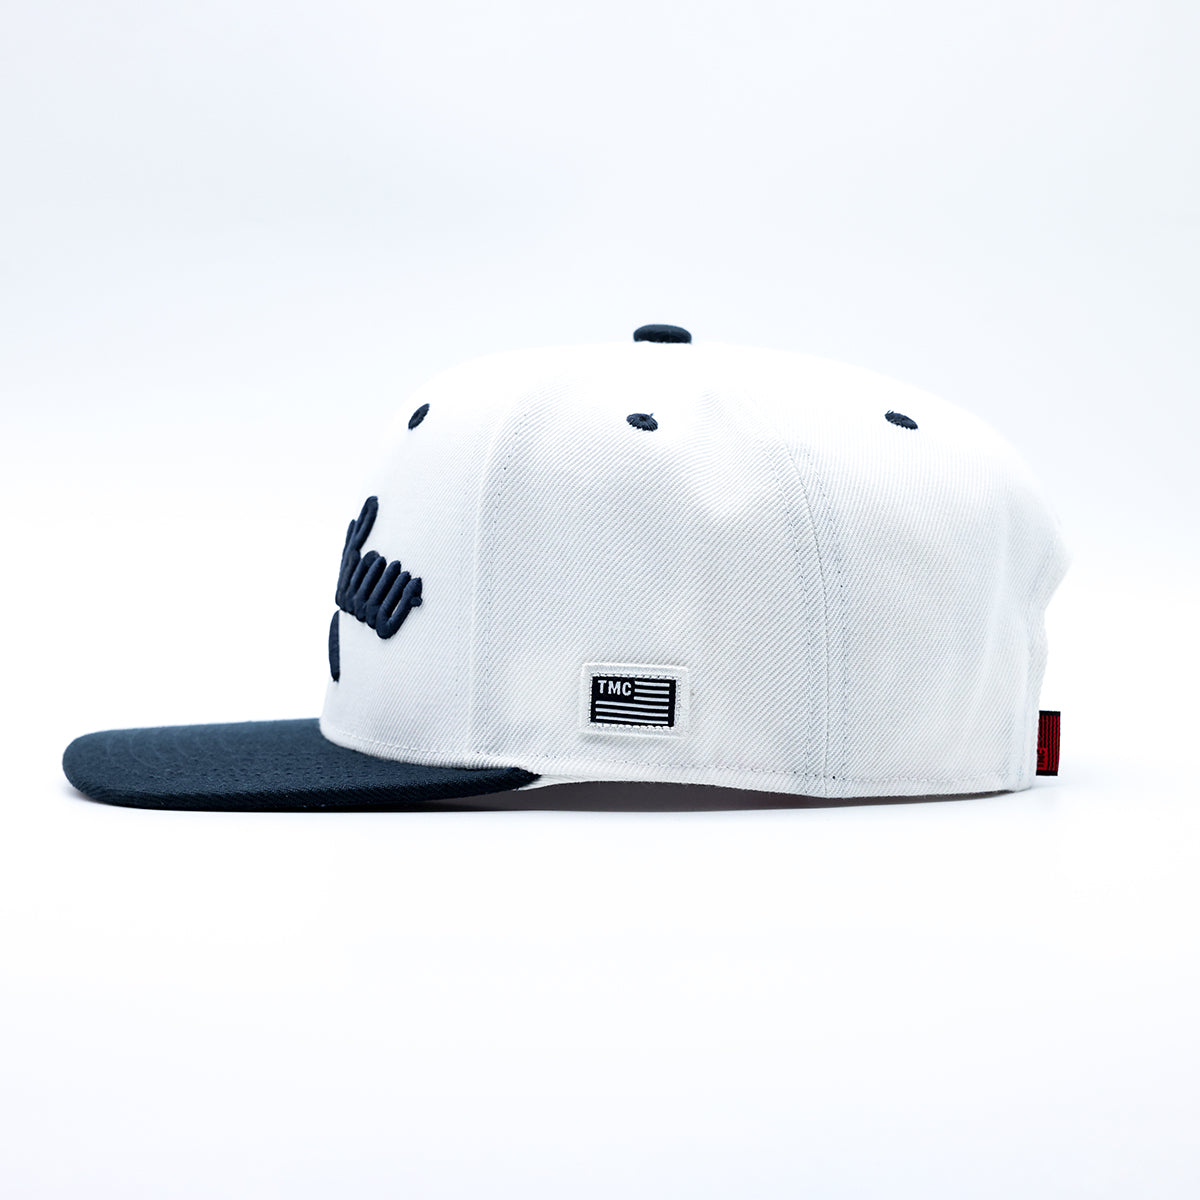 Crenshaw Limited Edition Snapback - White/Navy [Two-Tone] - Side